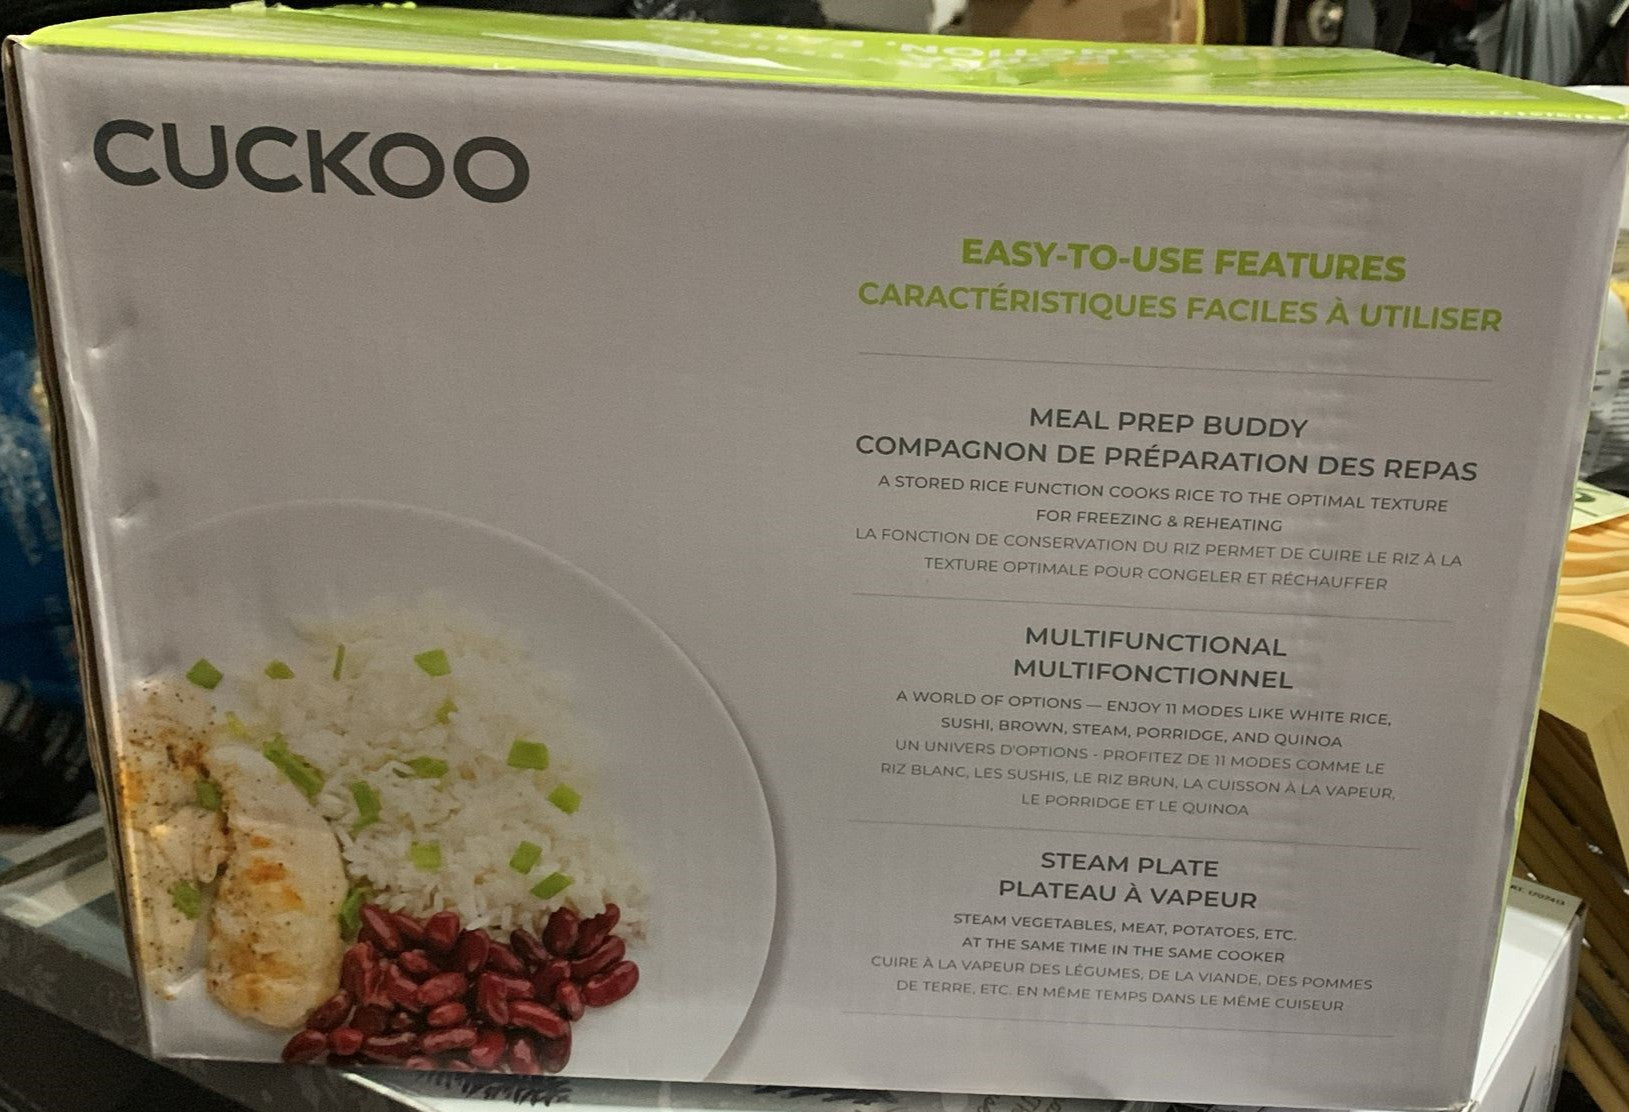 Cuckoo 6-cup Multifunctional Rice Cooker and Warmer Item